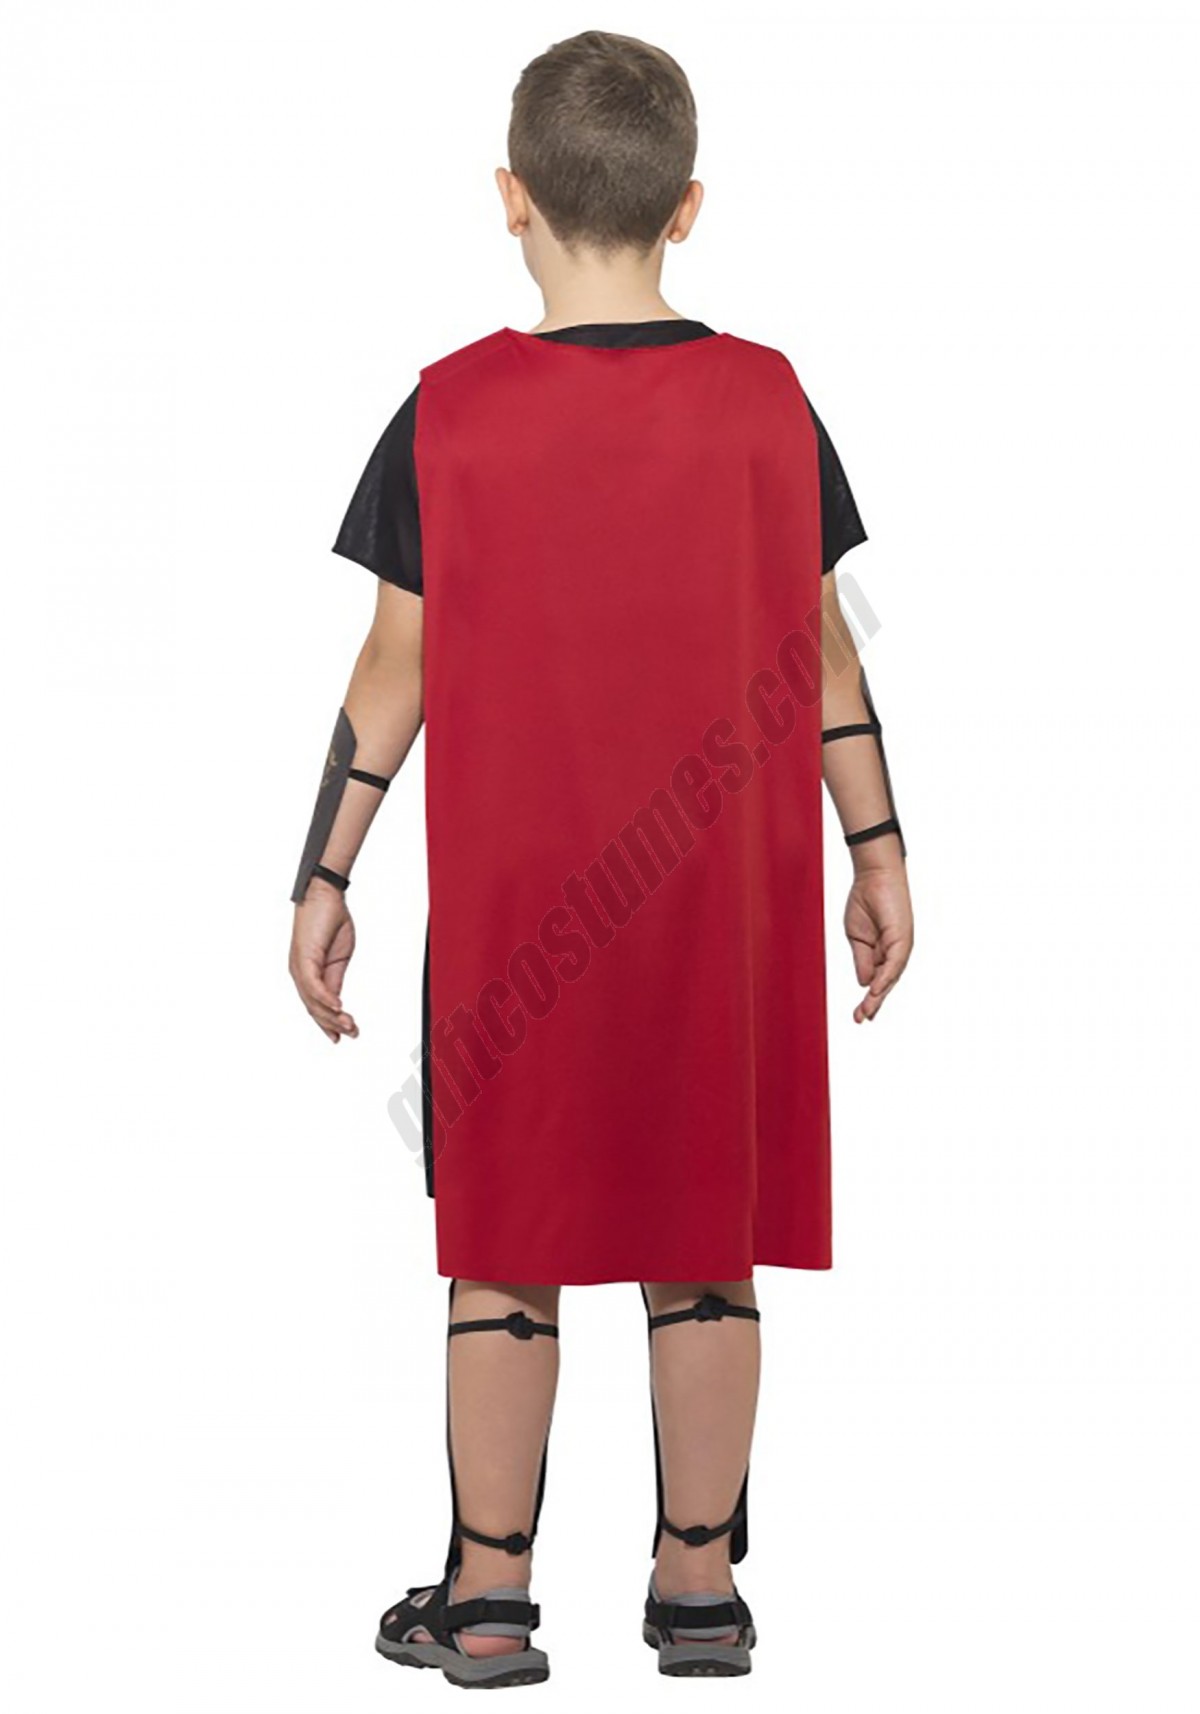 Roman Soldier Costume for Boys Promotions - -1